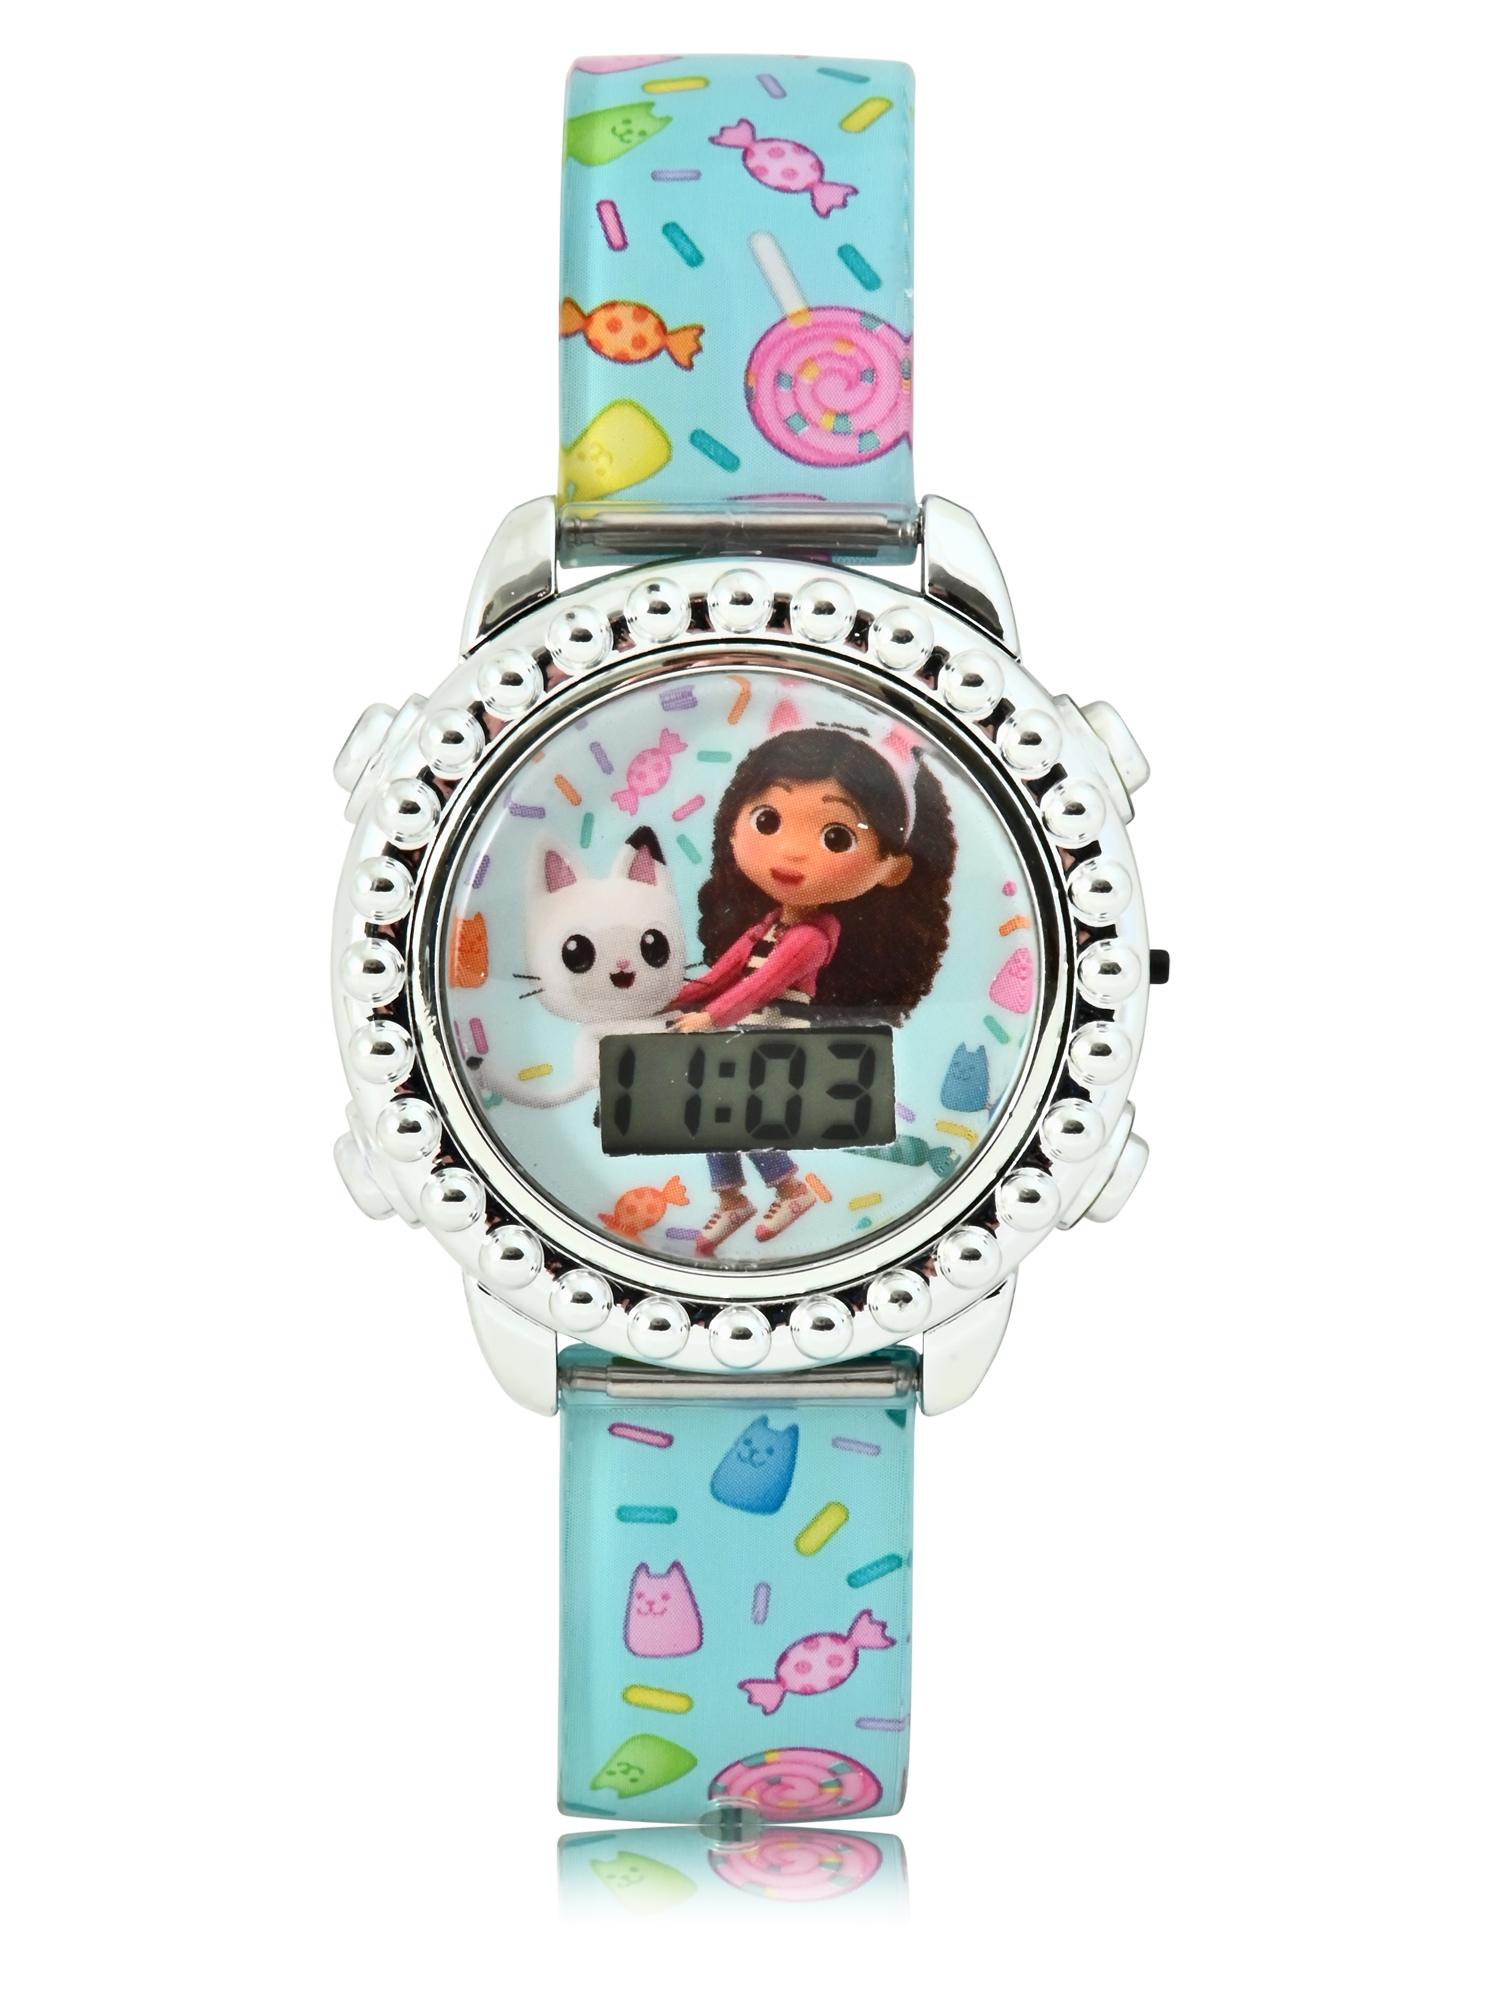 GAB4048WM Gabby Kids Molded Case Flashing Lights LCD Watch with Printed Strap - image 3 of 3